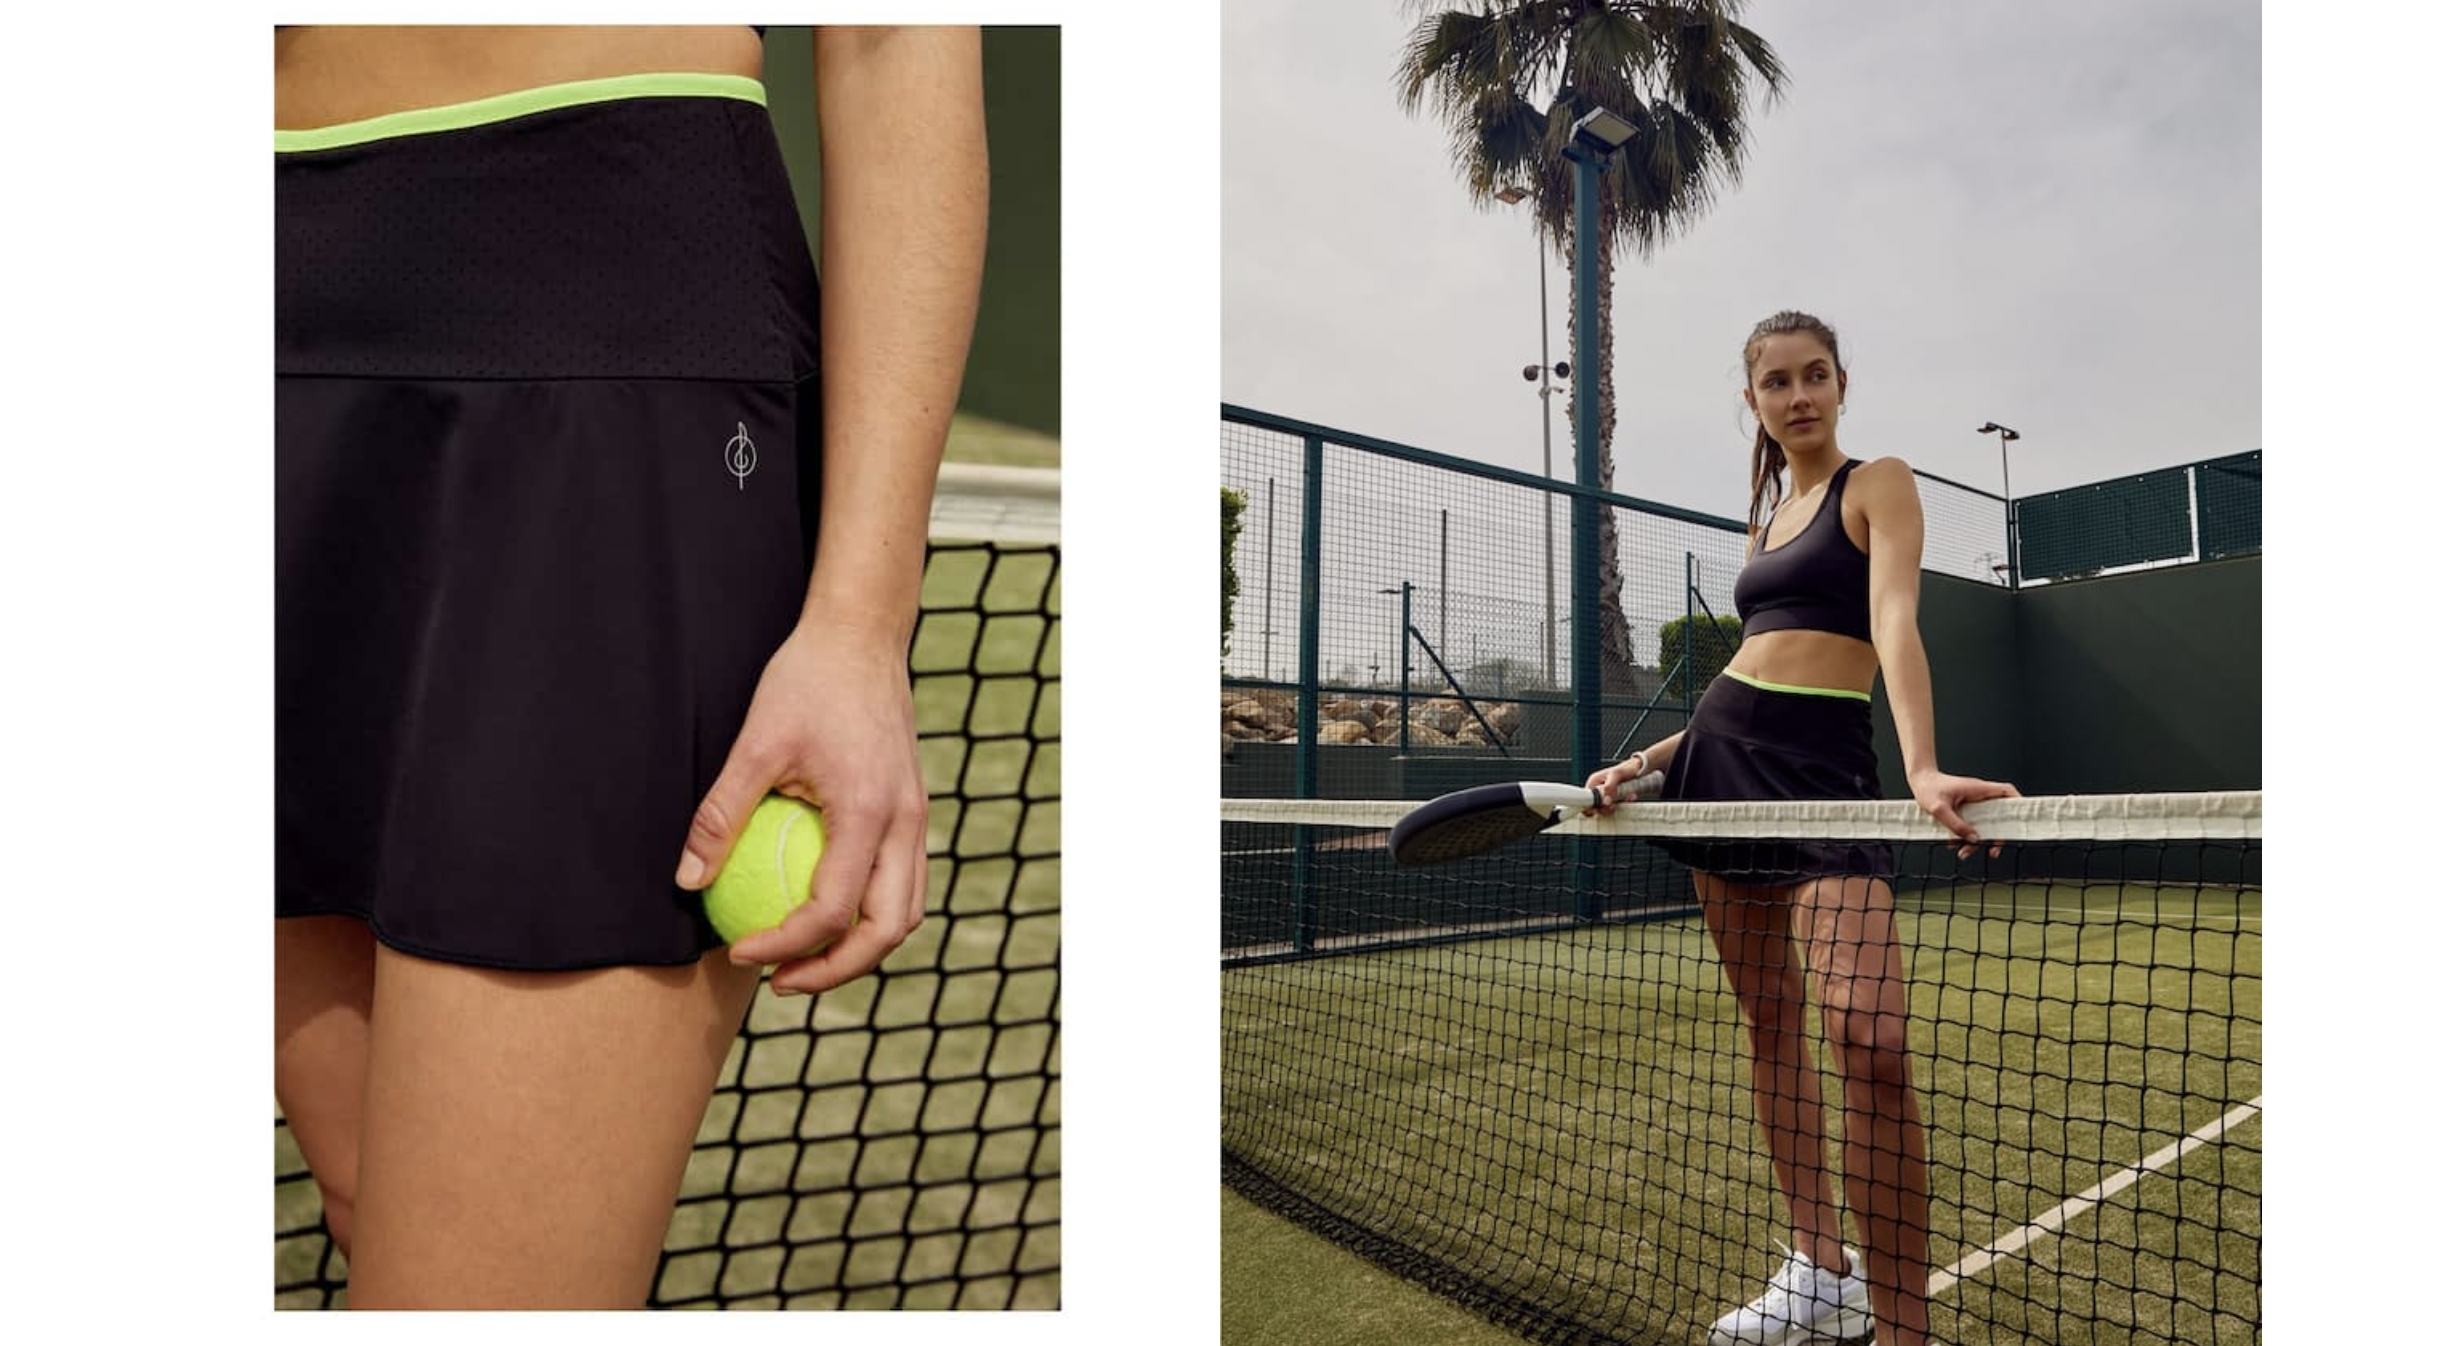 Inditex, the ready-to-wear giant, is embarking on the padel